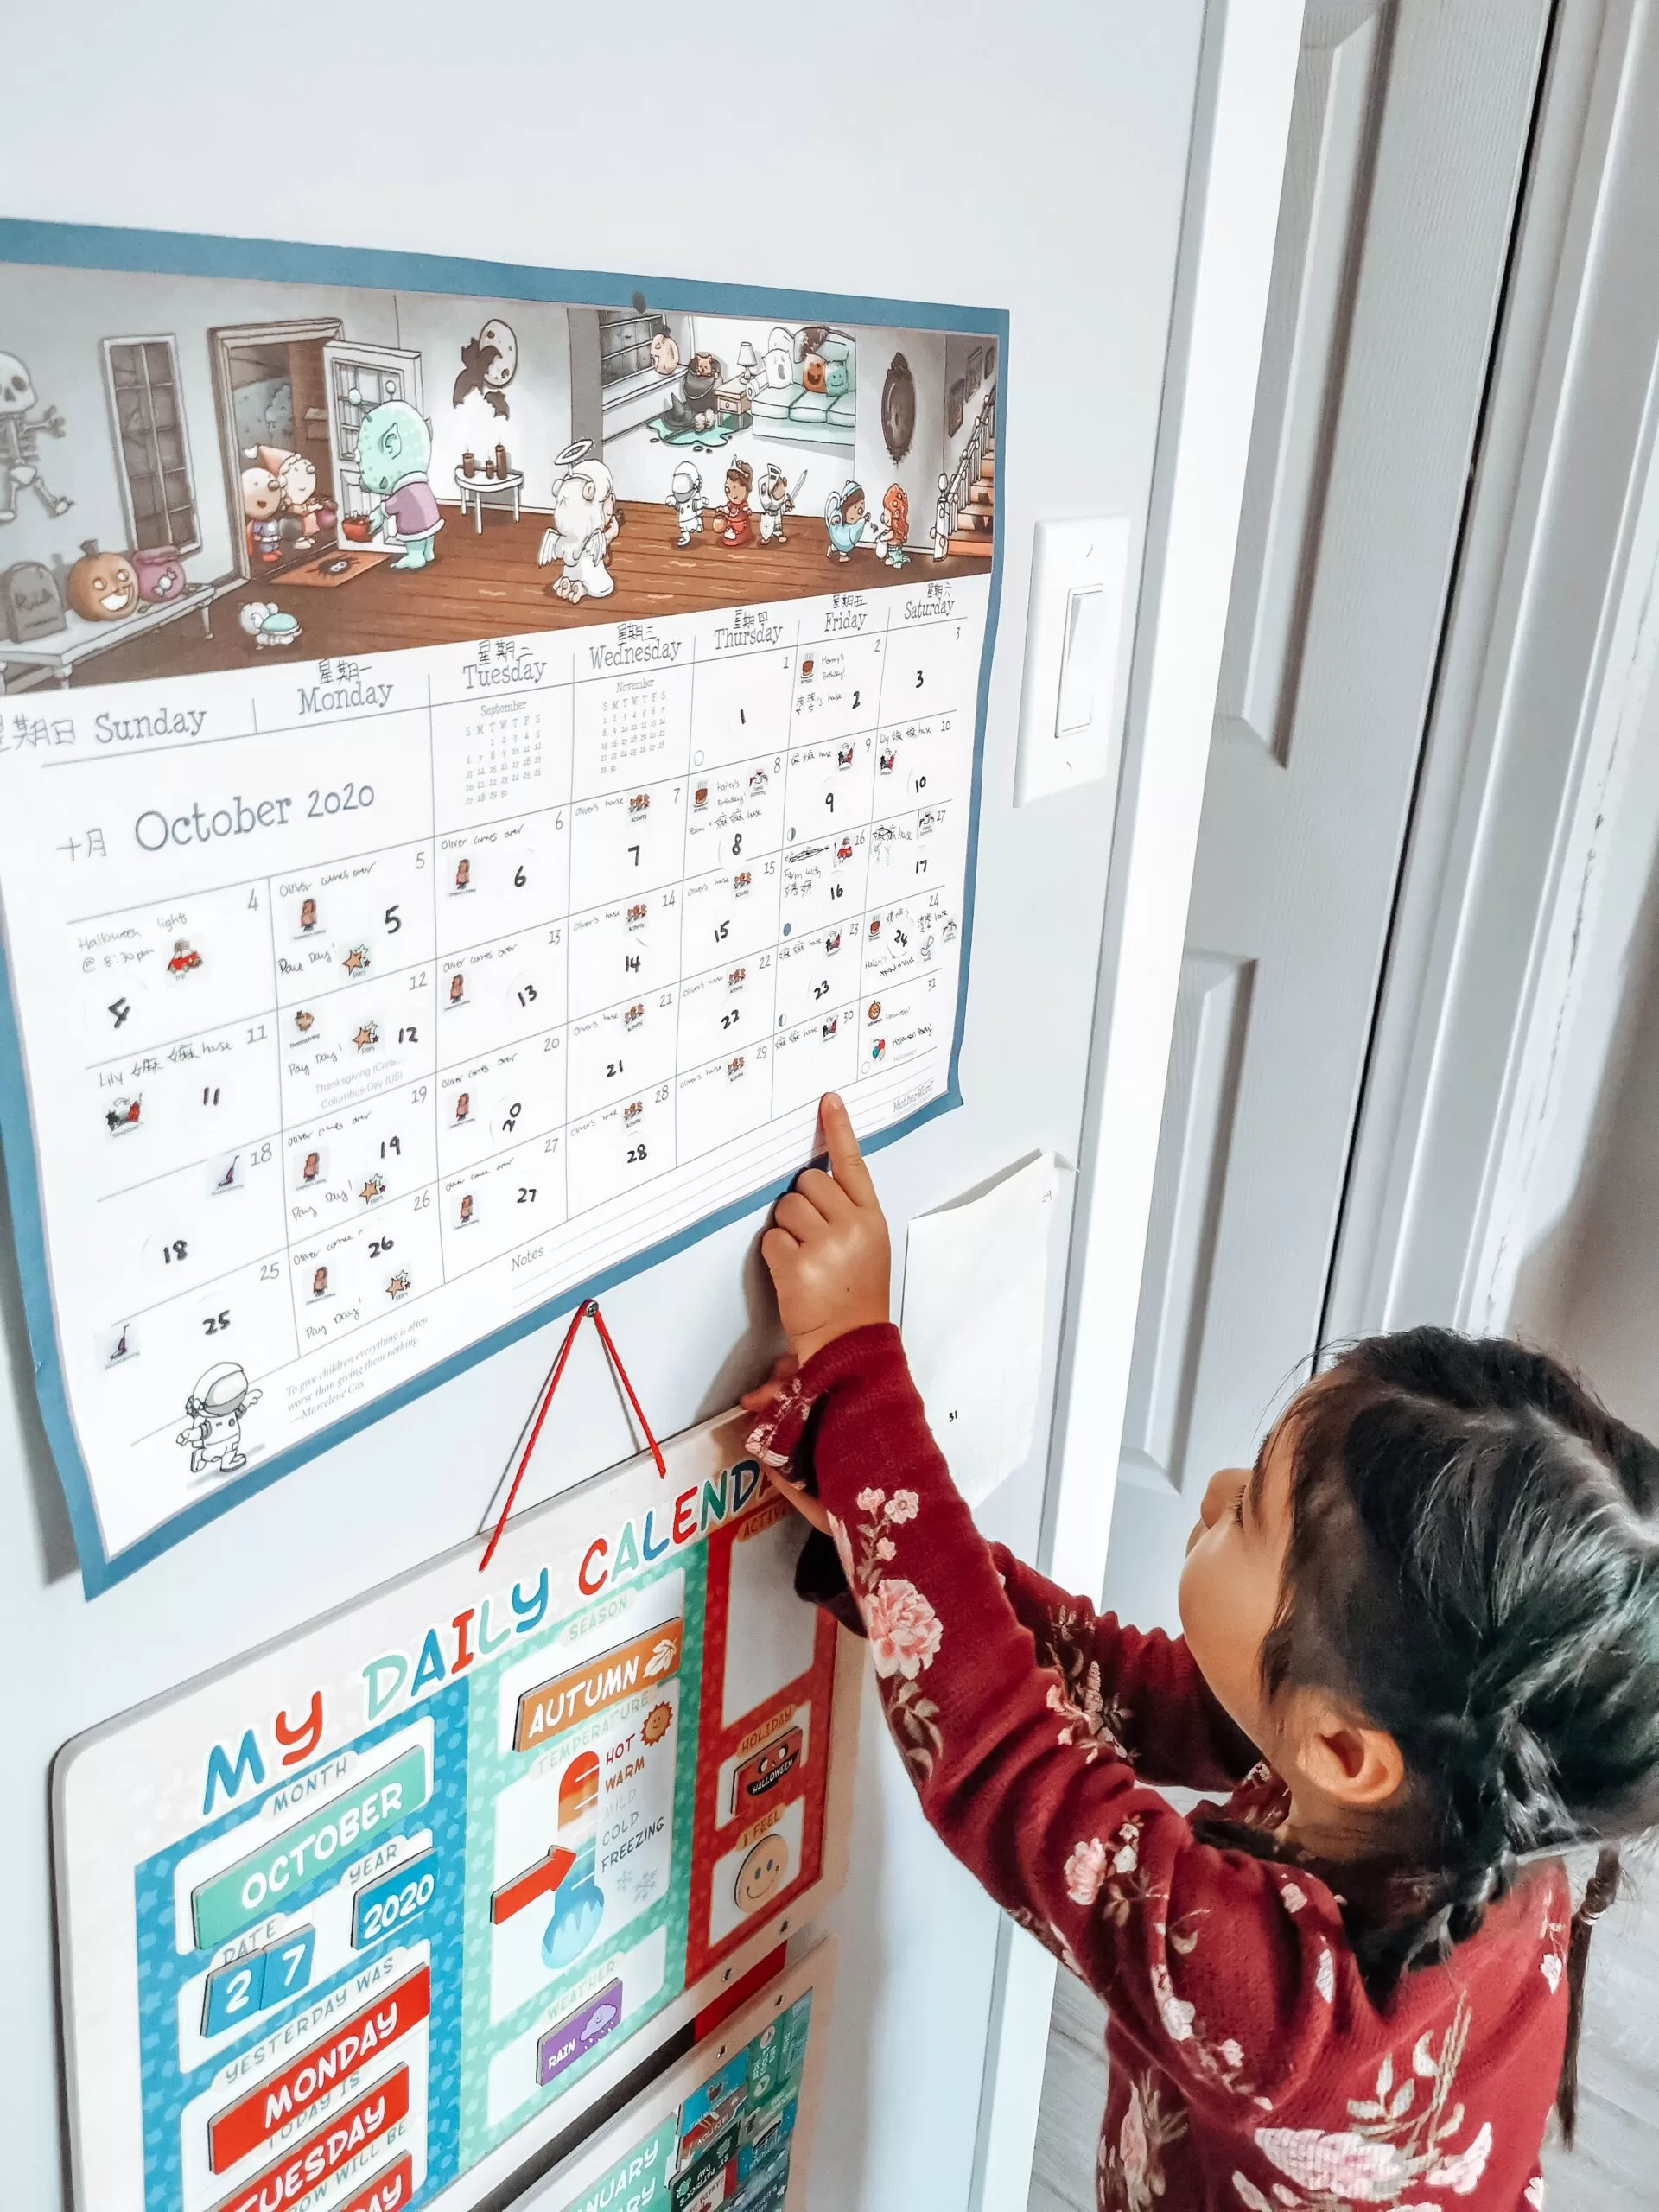 How to Create an Interactive Calendar for Kids?